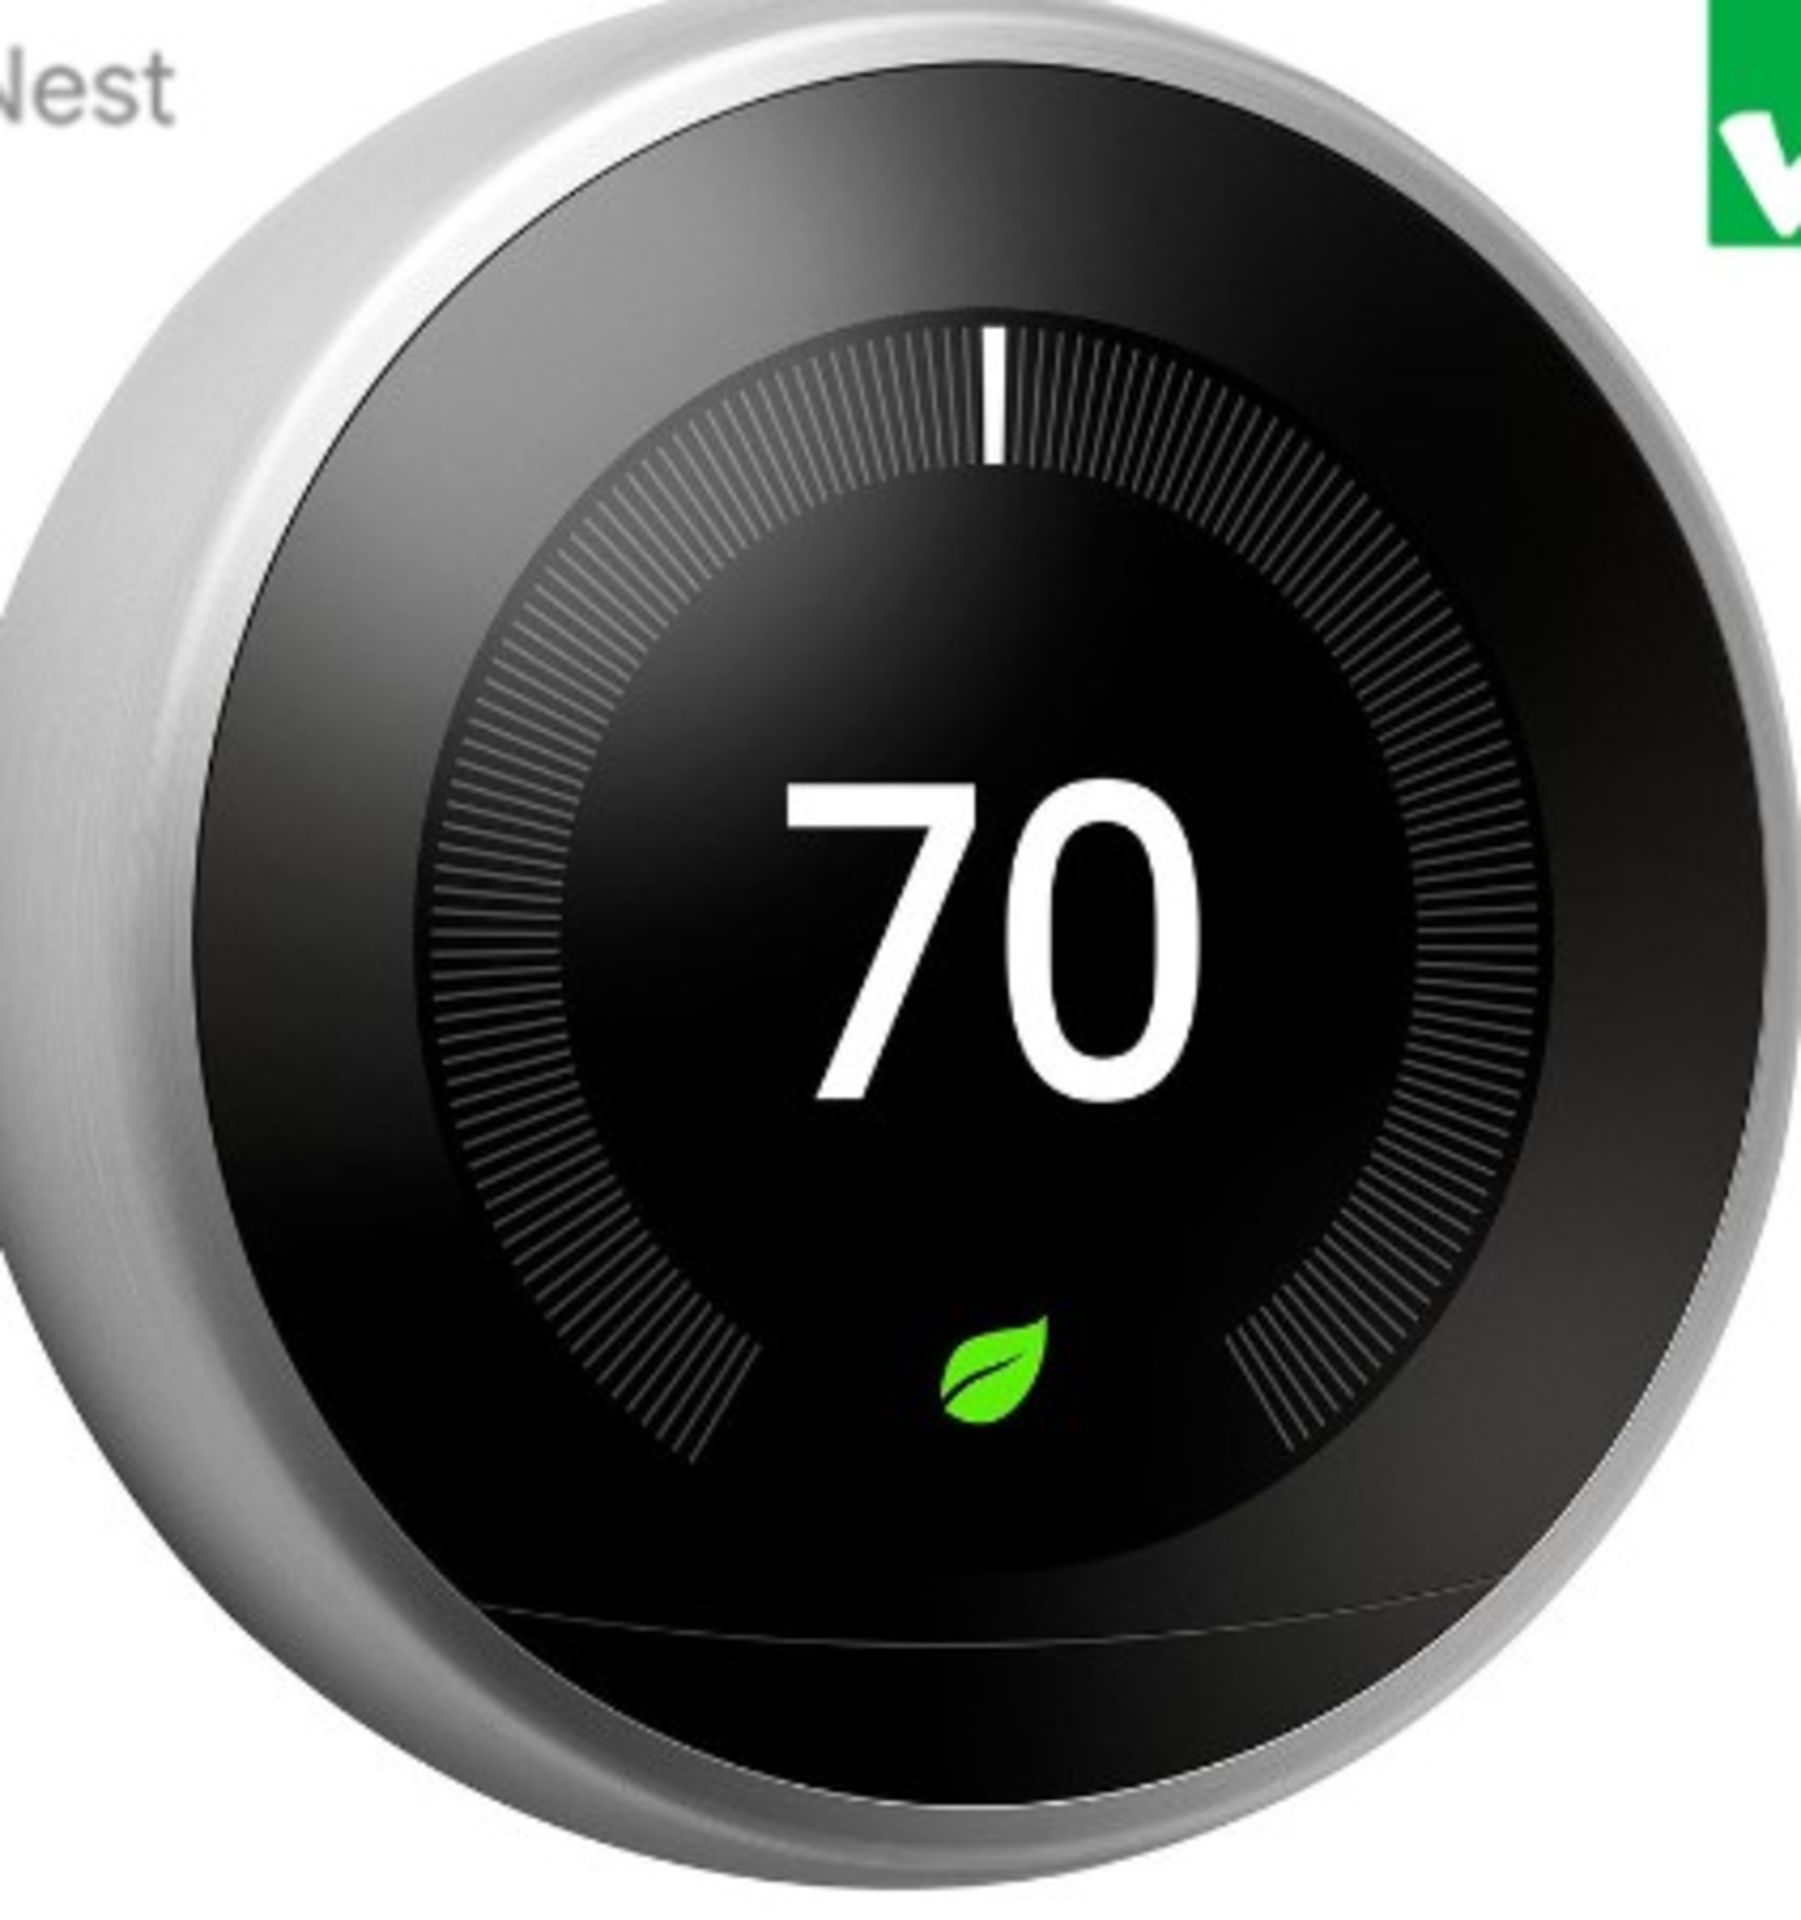 Google Nest Learning Thermostat 3rd Generation White. The 3rd generation Google Nest Learning